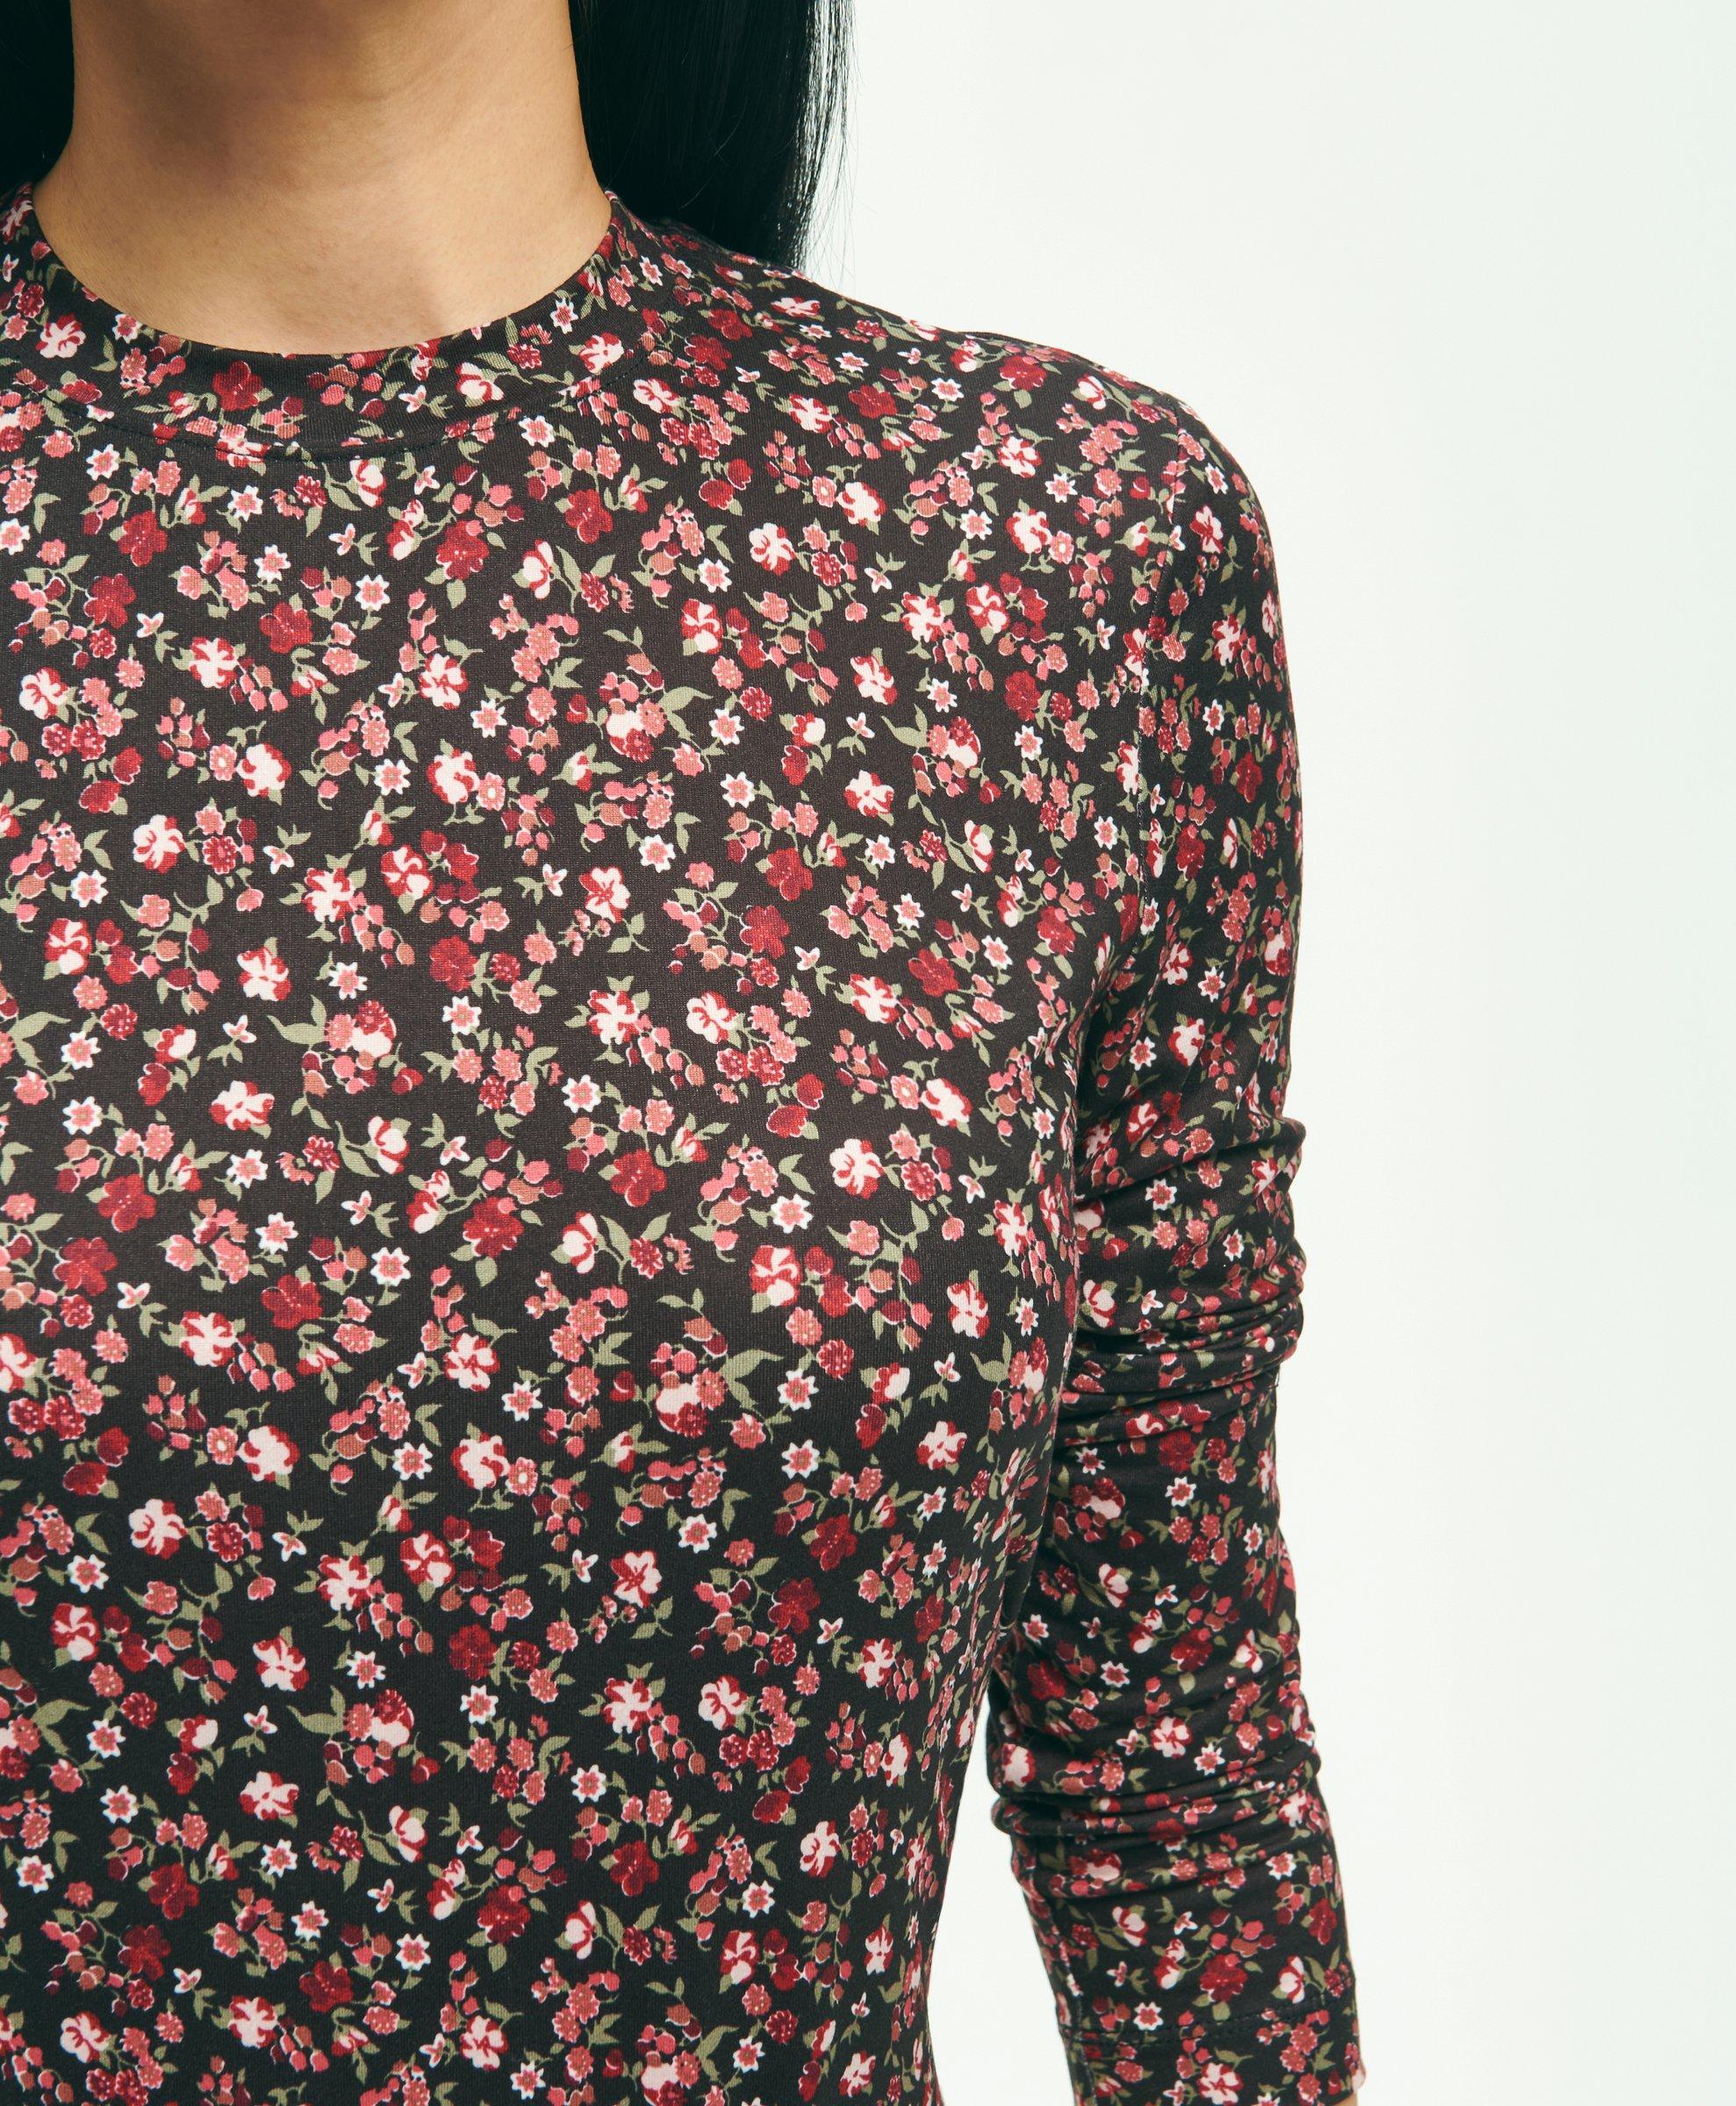 T-Shirt Long-Sleeve Jersey Ditsy Floral Print